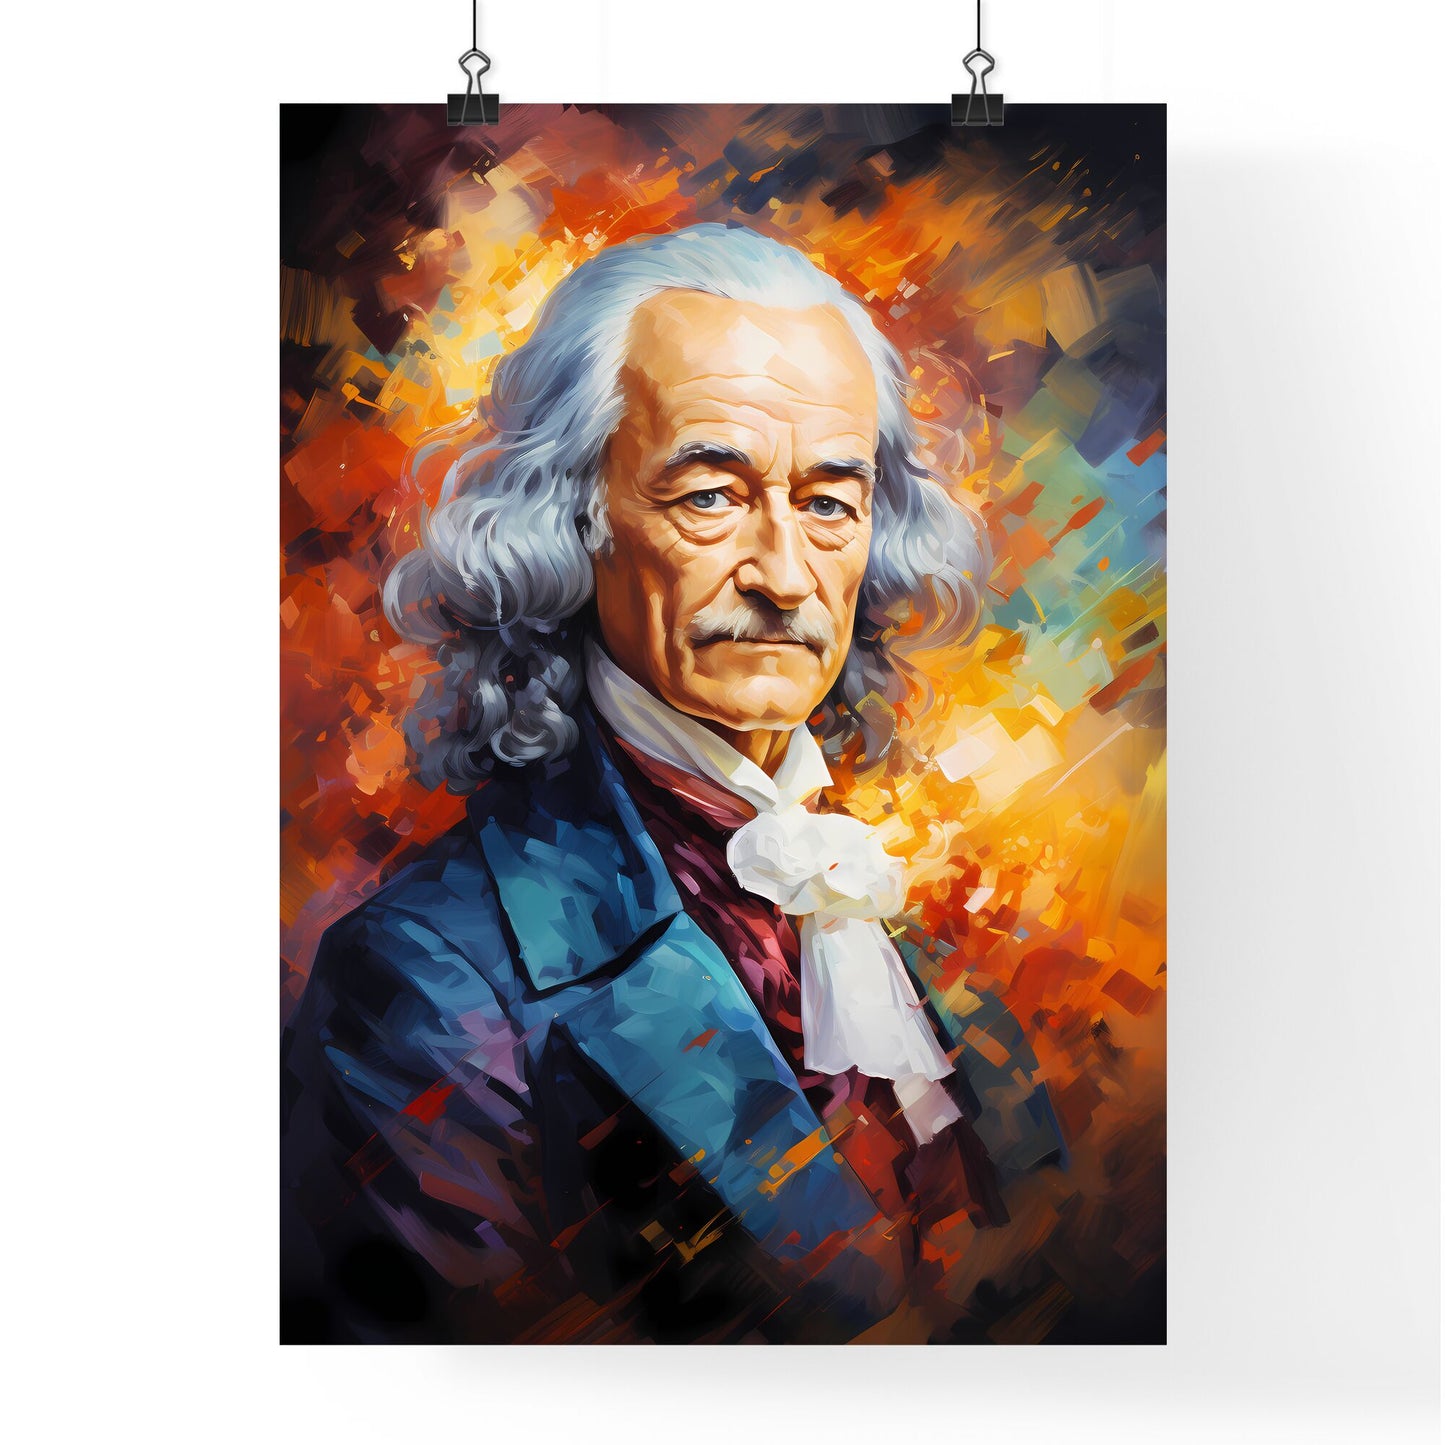 Voltaire French Enlightenment Writer Philosopher - A Painting Of A Man With A Mustache Default Title